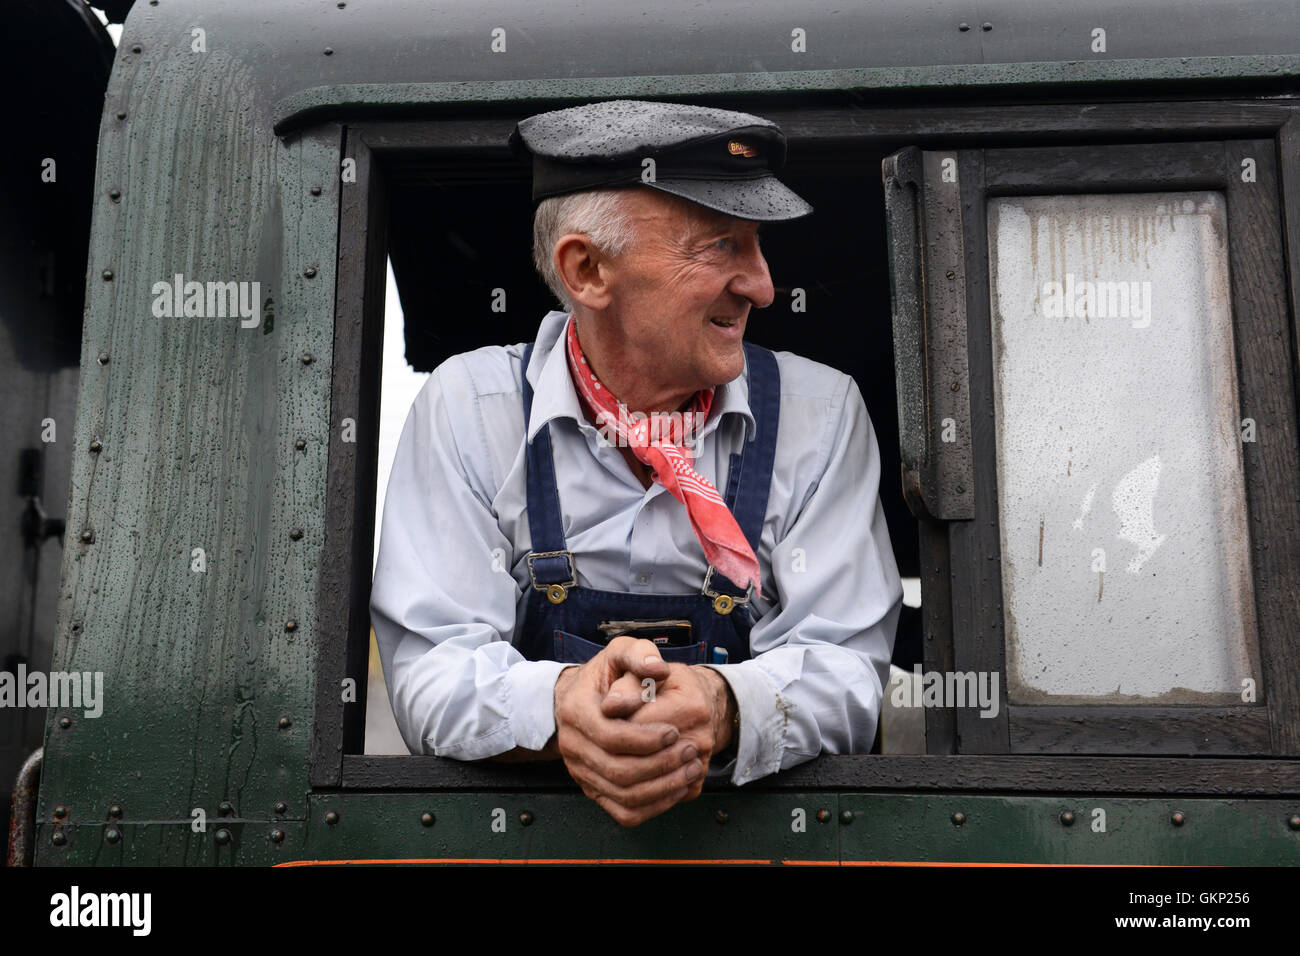 Train driver on steam locomotive for Severn Valley Railway uk Stock Photo